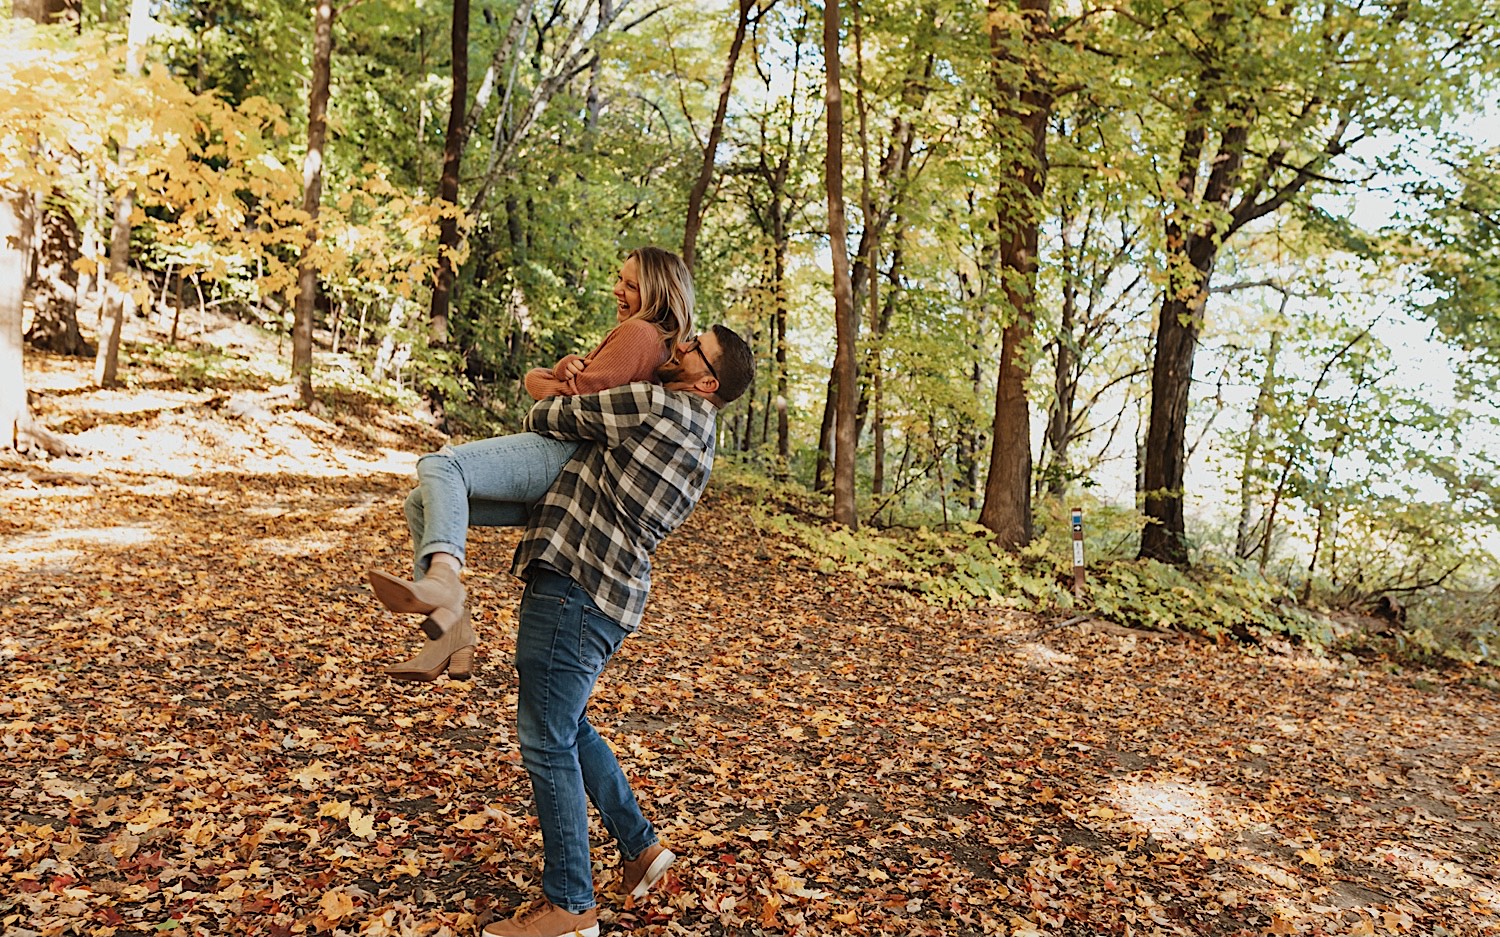 During their fall engagement session in Winona a woman laughs as a man lifts her in the air from behind and spins her around, they're on a trail in the forest covered in leaves